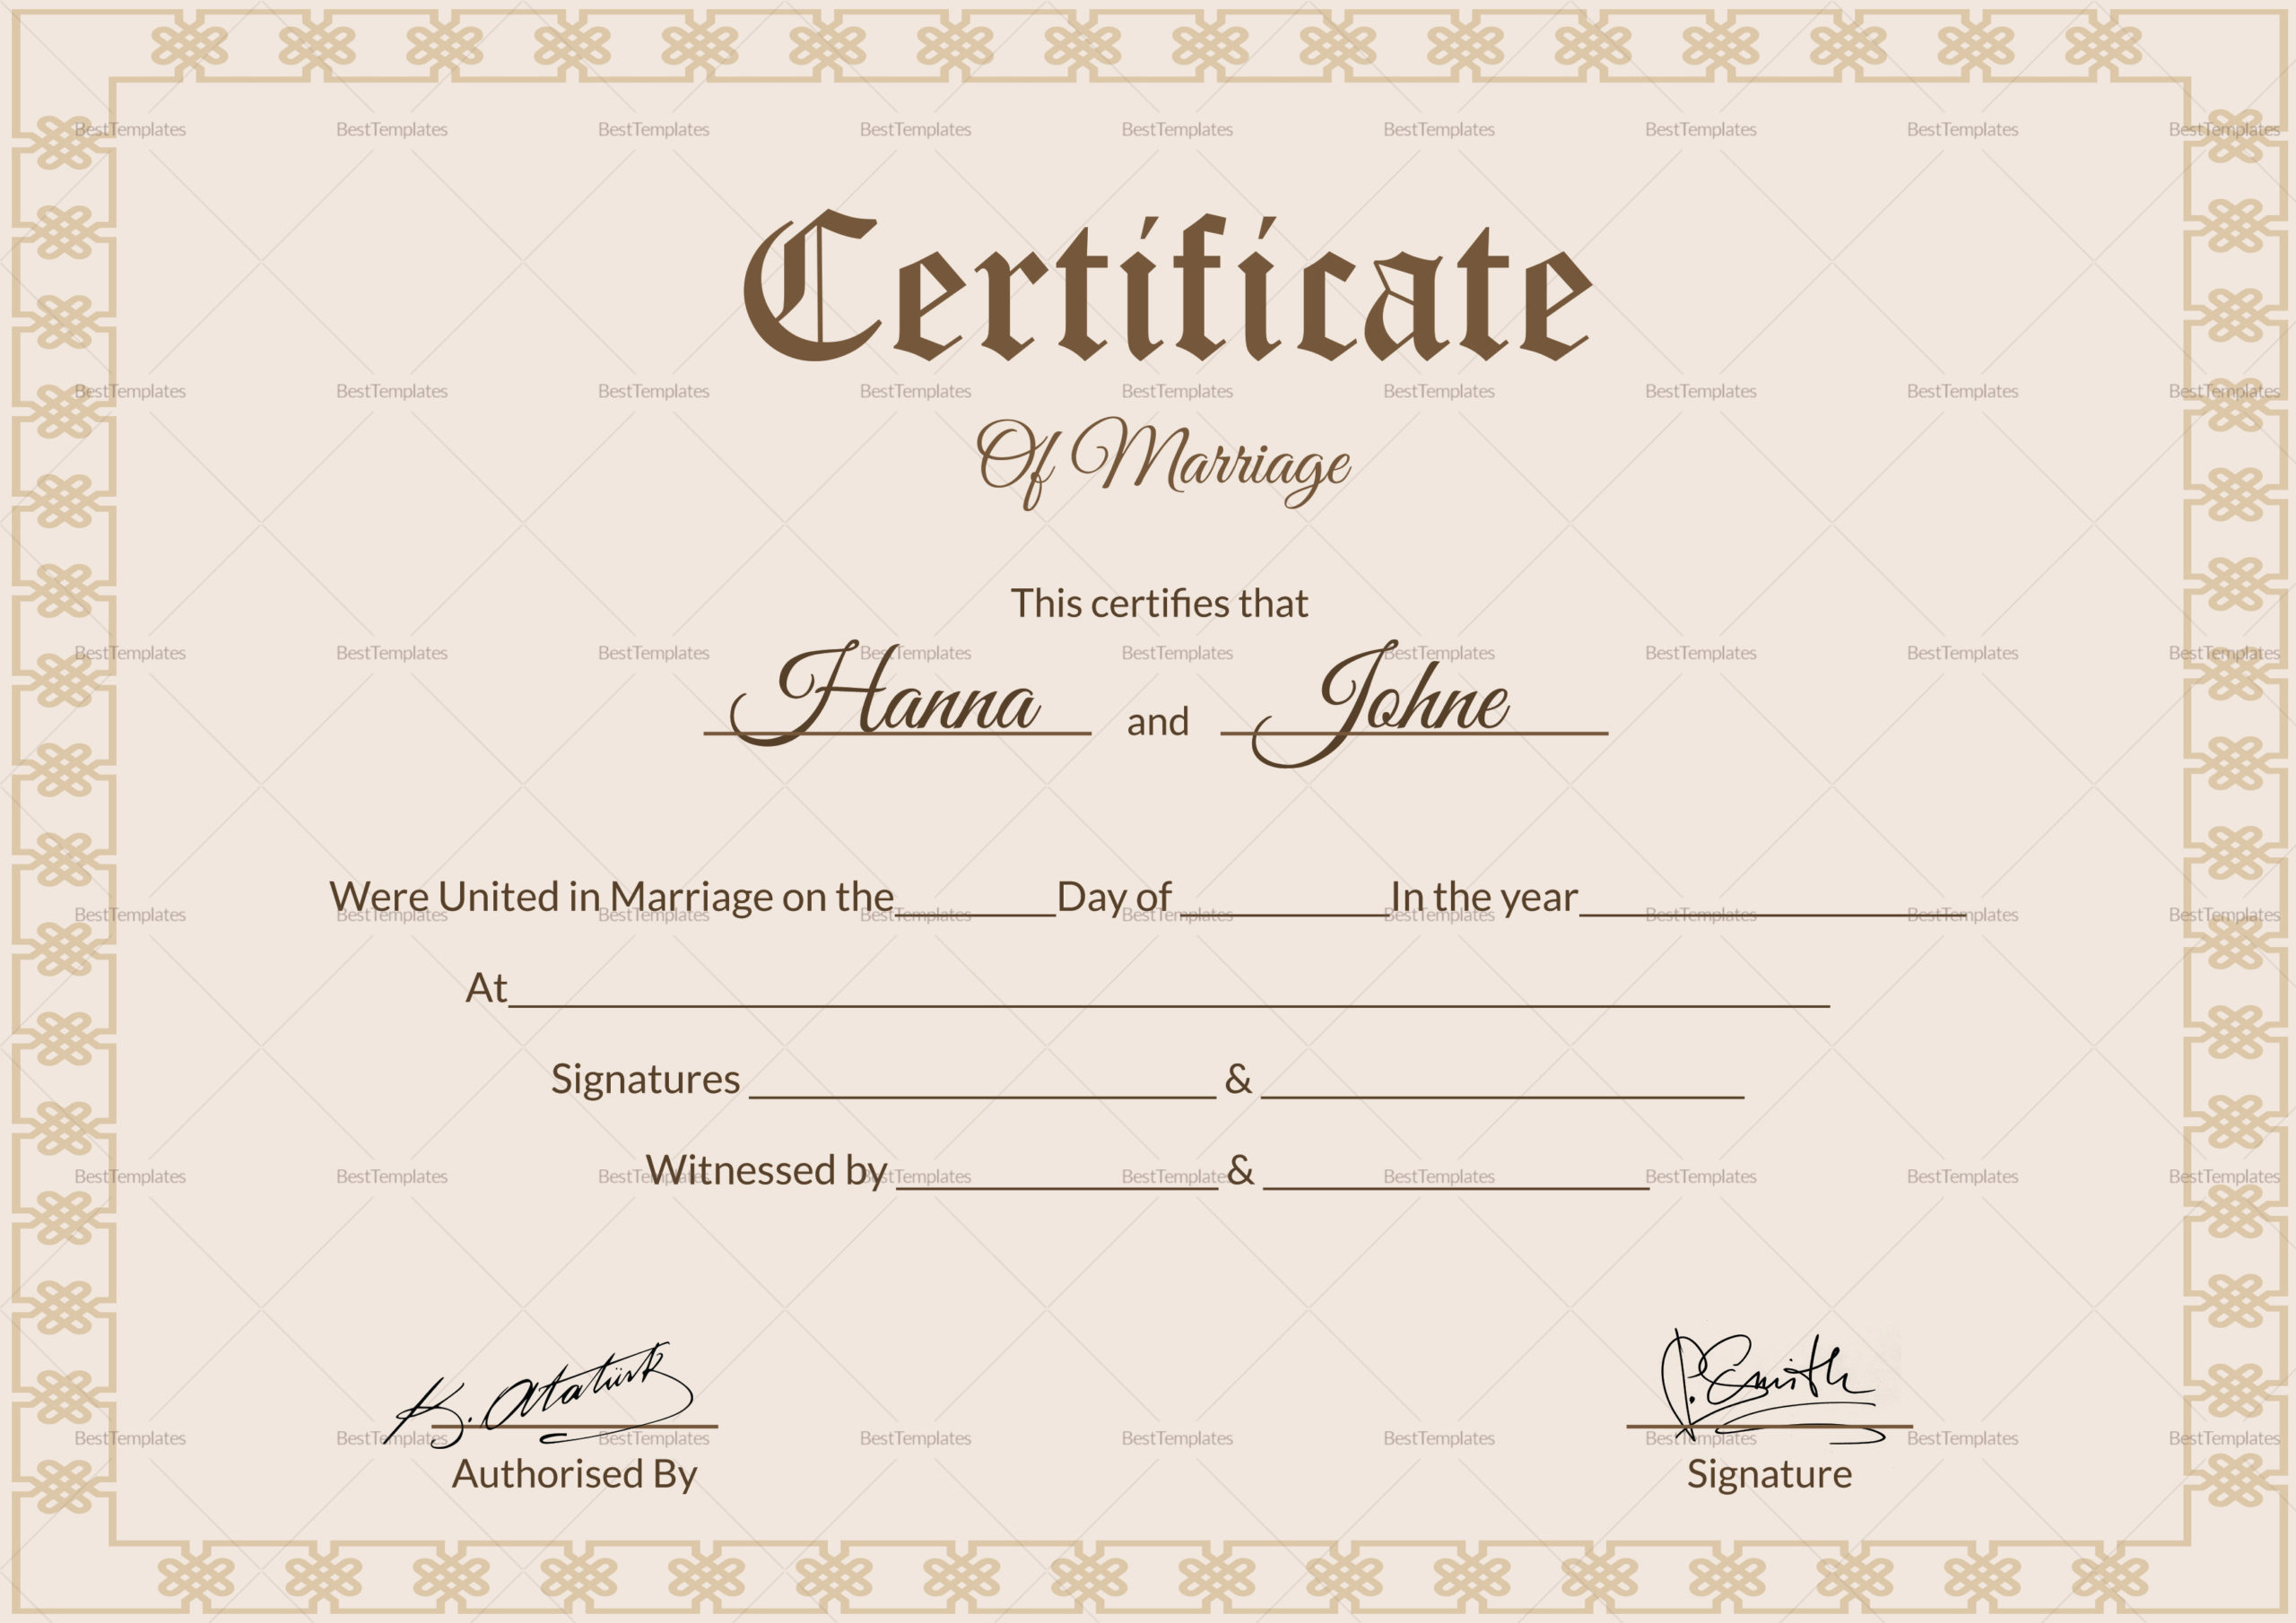 Simple Marriage Certificate Design Template In Psd Word Intended For Certificate Of Marriage Template